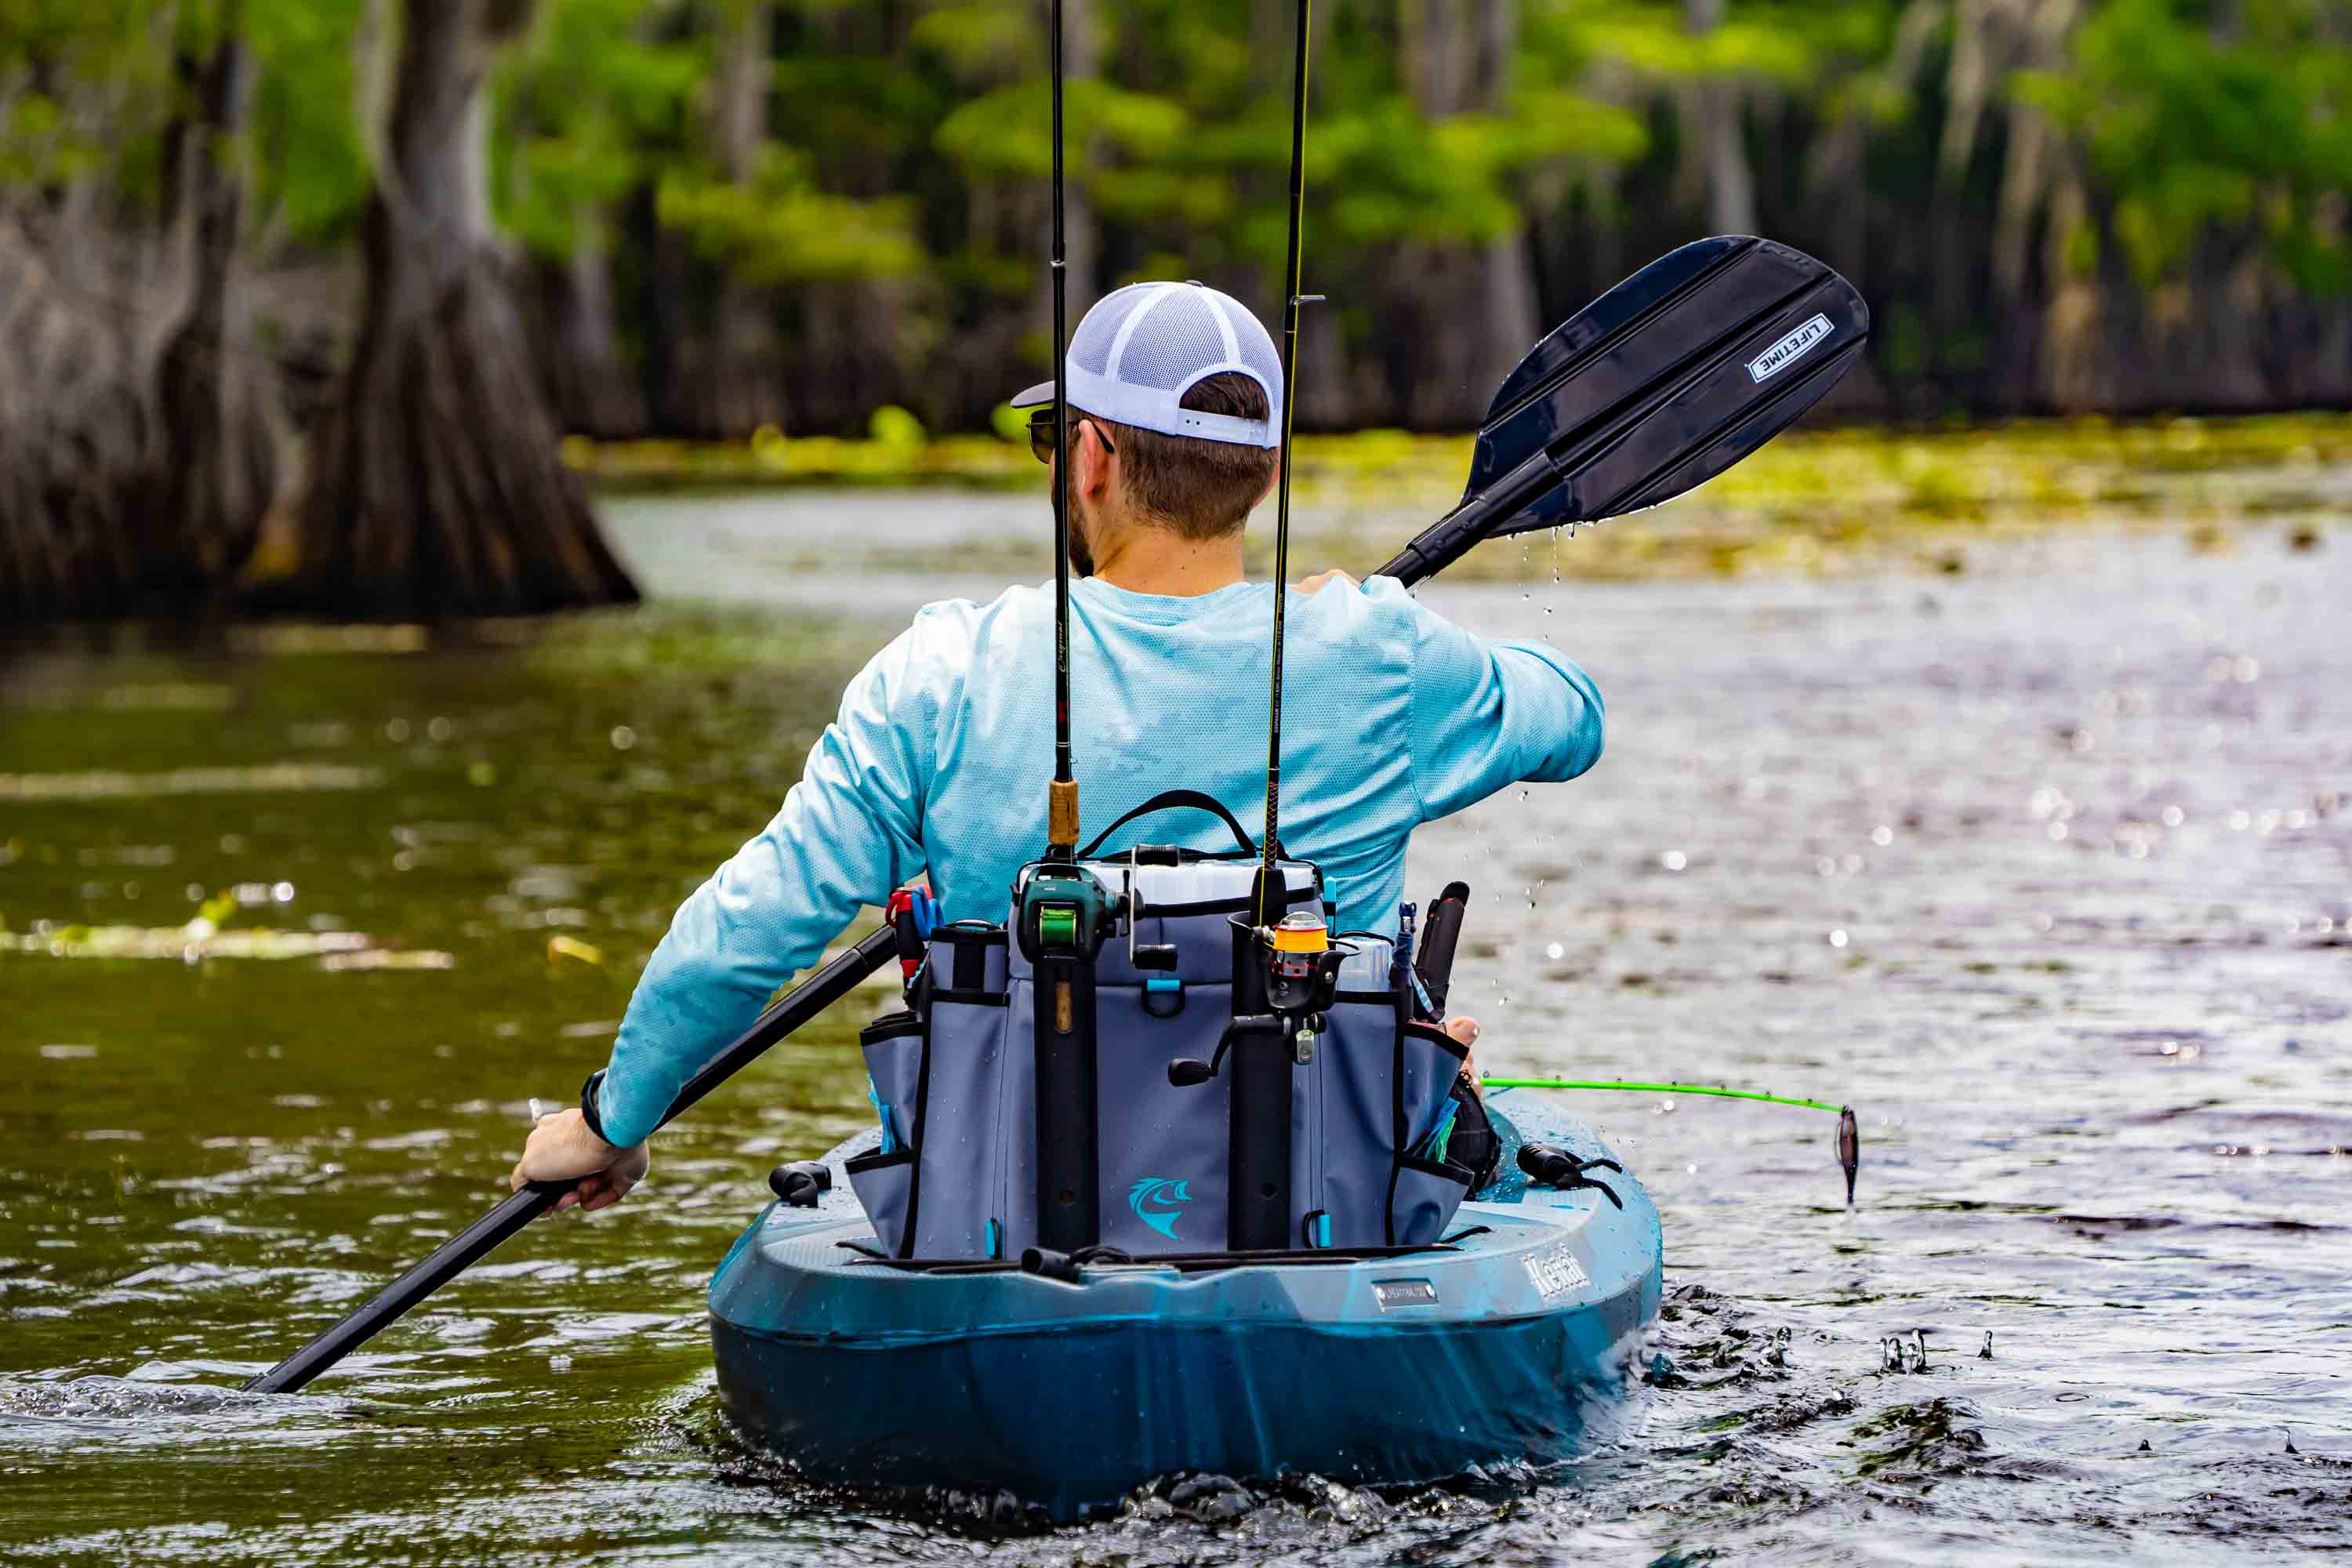 Rigger Series Tackle Bags from Evolution Outdoor Now Shipping 